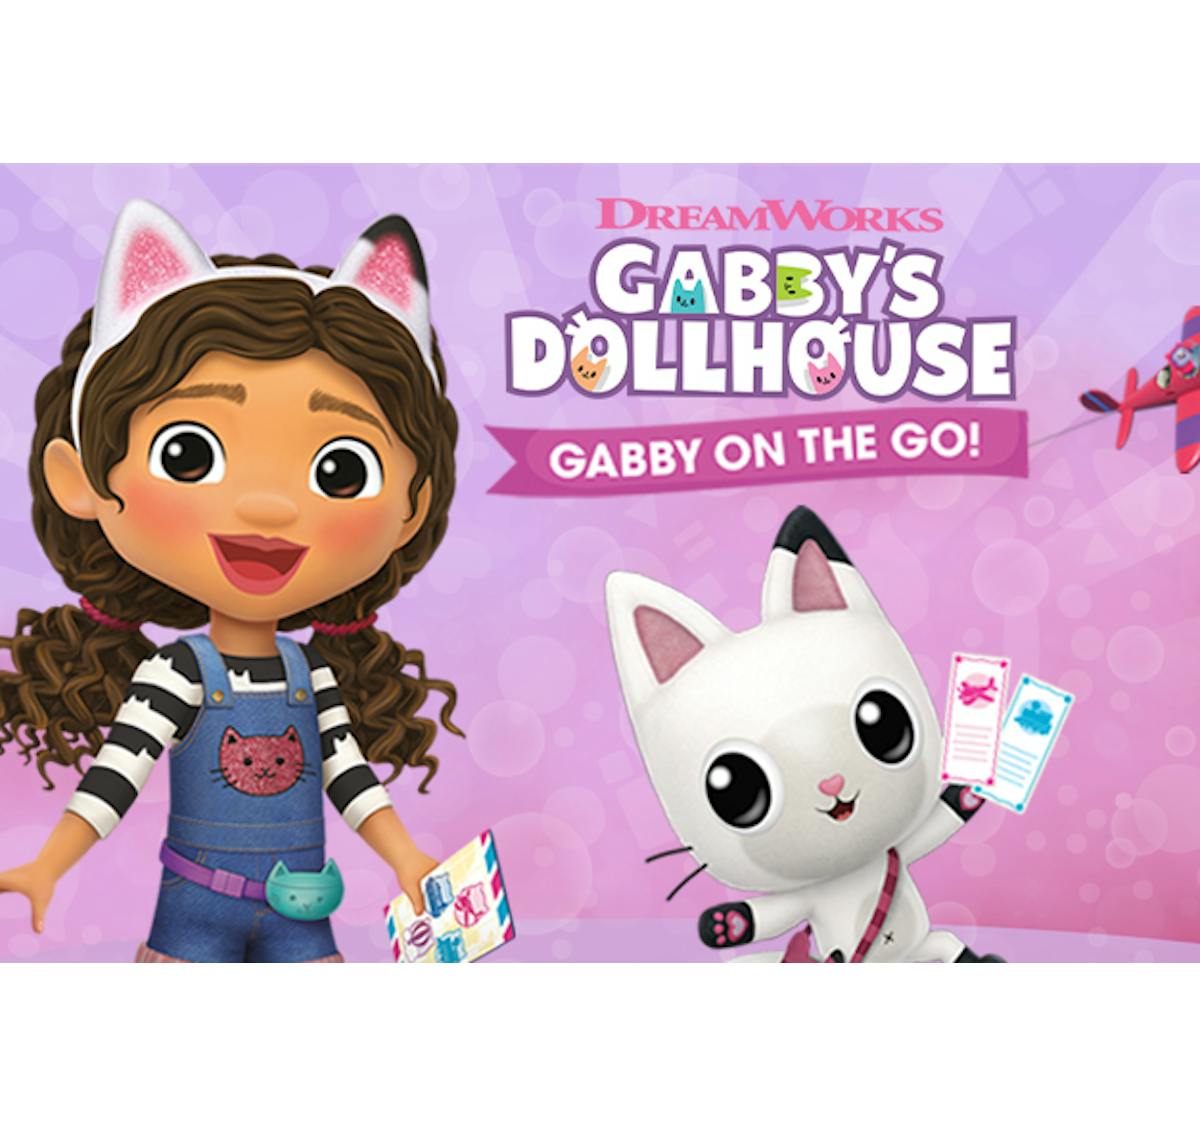 Here's why your kids will LOVE the new Gabby's Dollhouse tour - Netmums